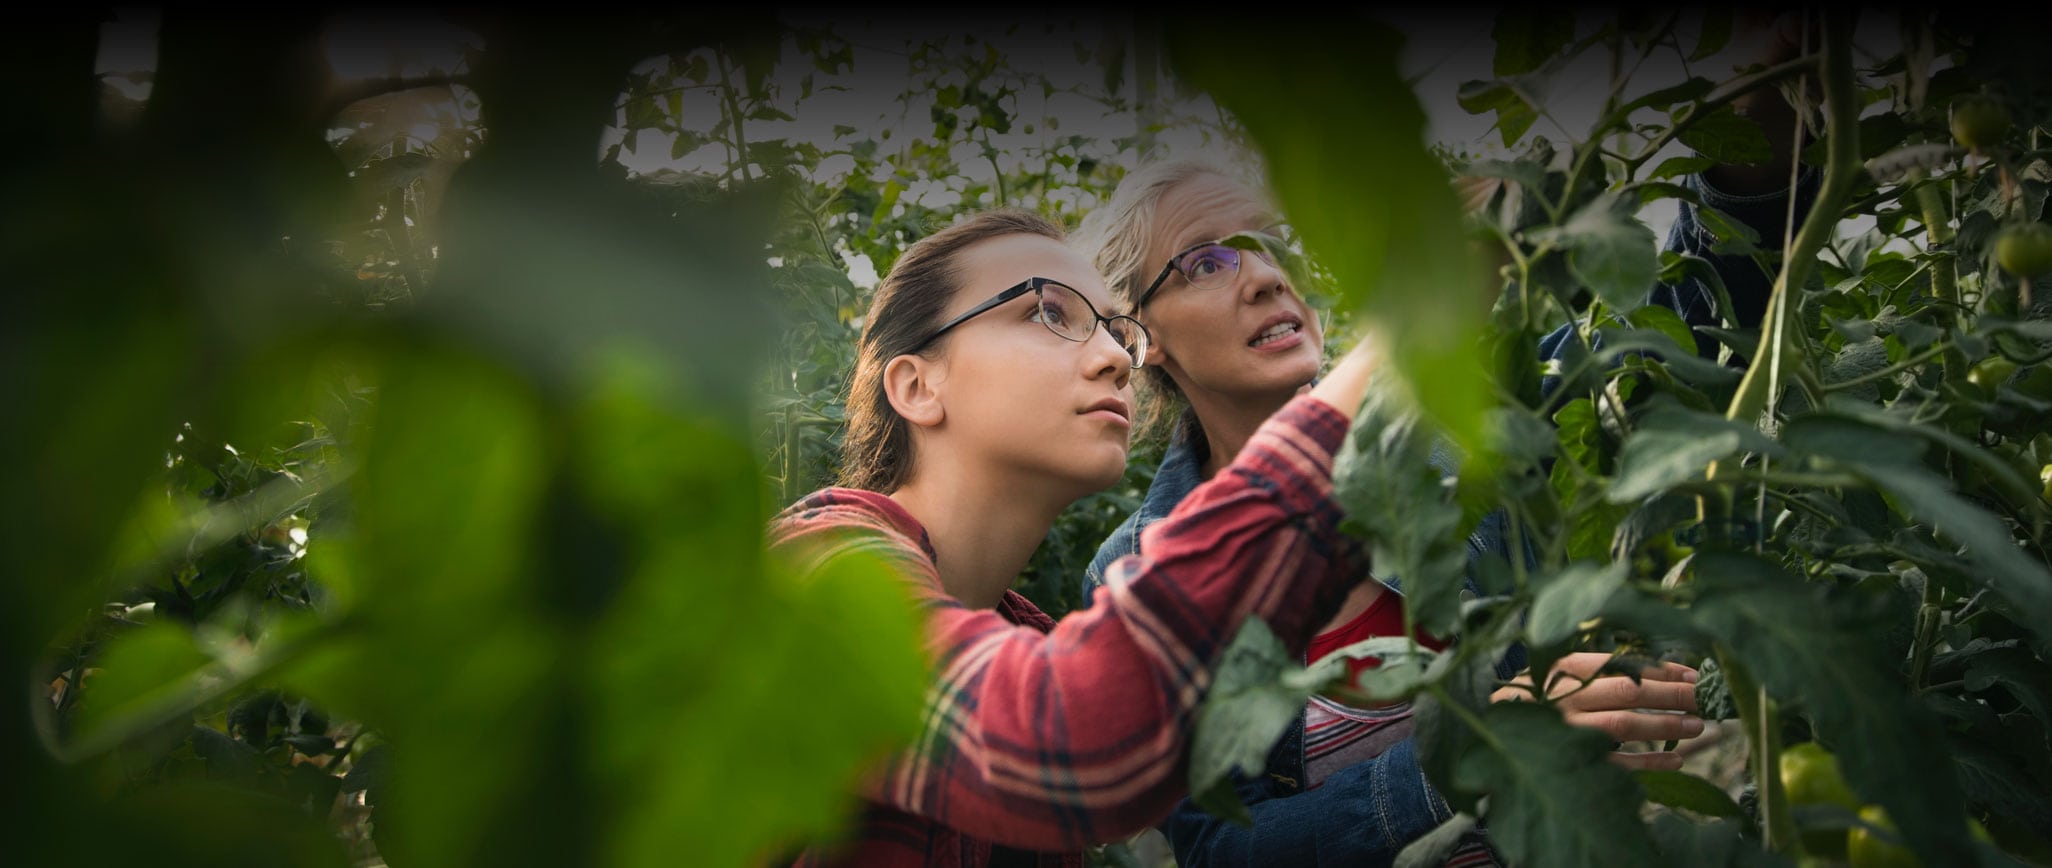 Woman and young girl harvesting tomatoes in a greenhouse cultivation system